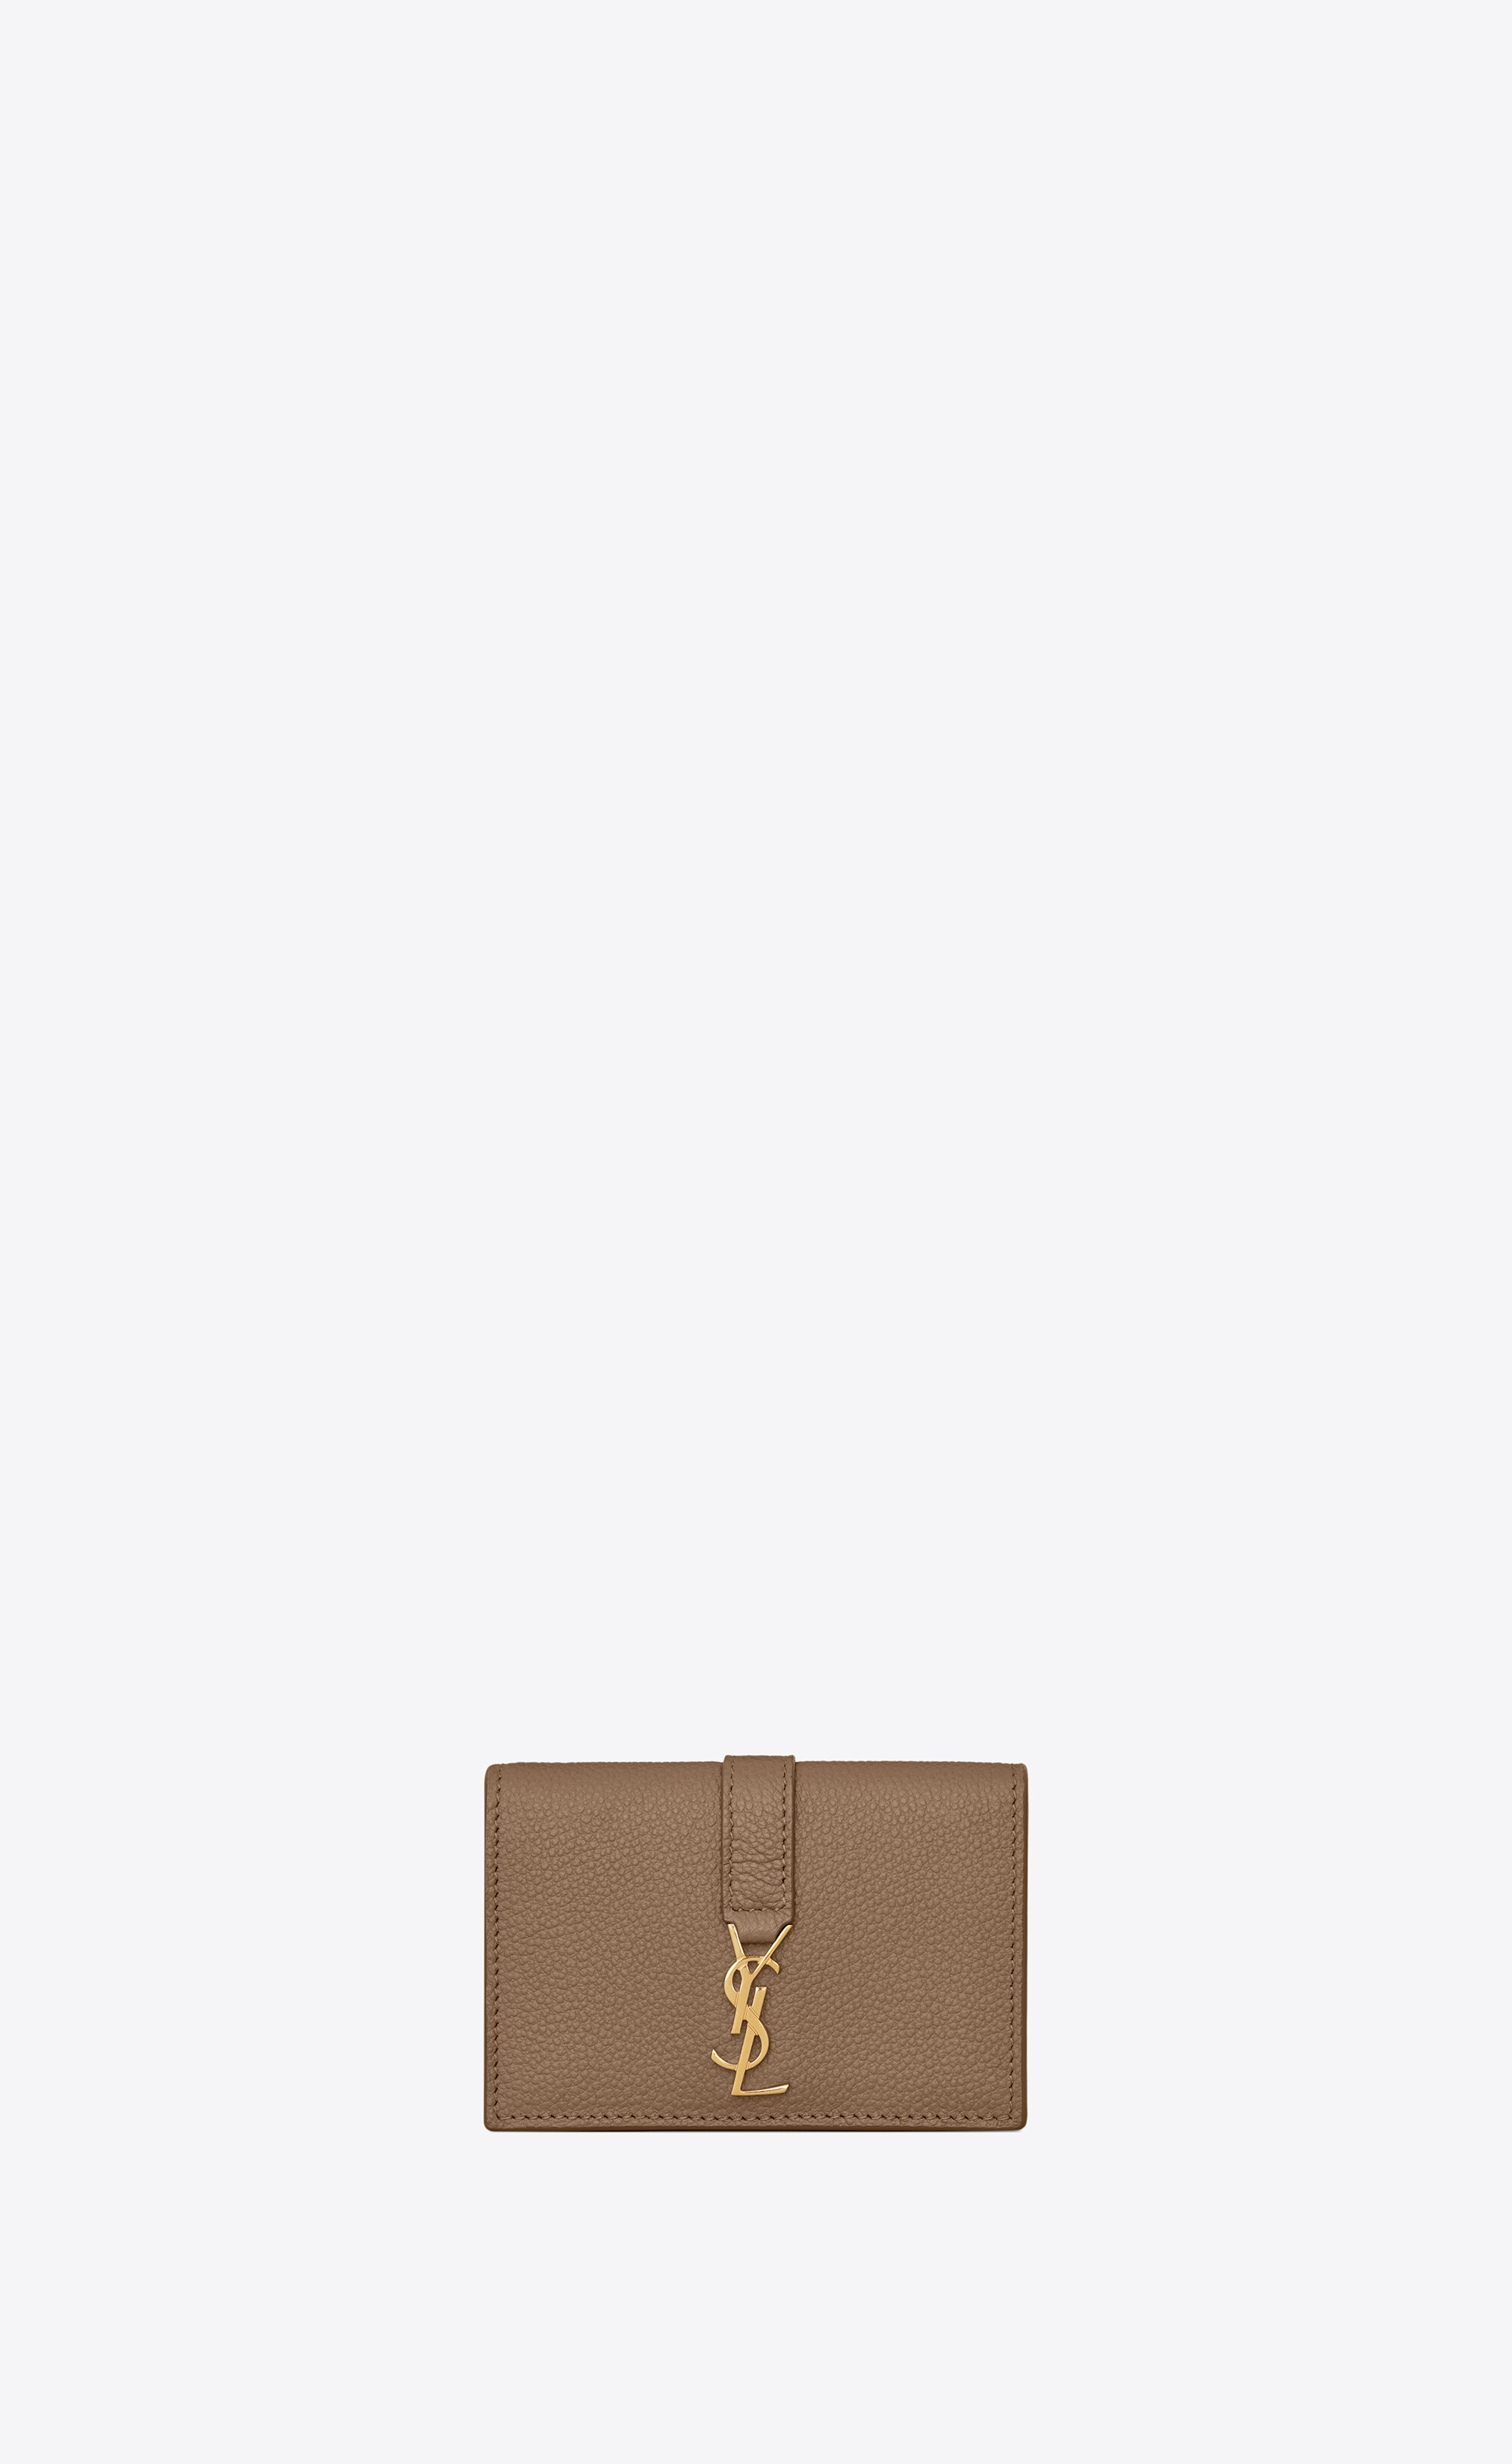 YSL LINE business card case in grained leather, Saint Laurent